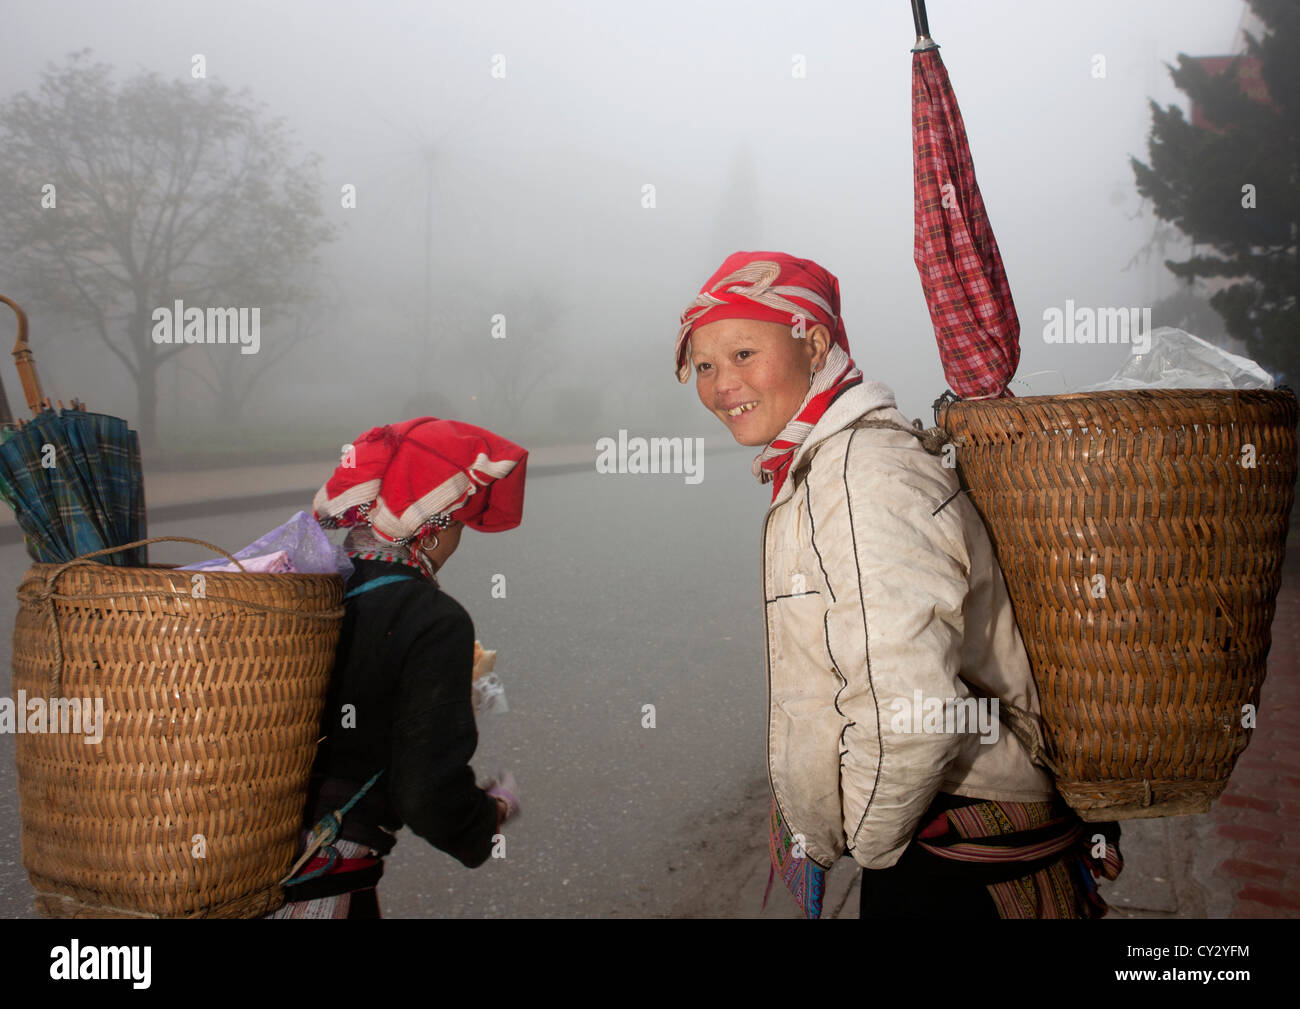 Red Dzao Women Carrying Umbrellas In The Baskets On Their Back, Sapa, Vietnam Stock Photo